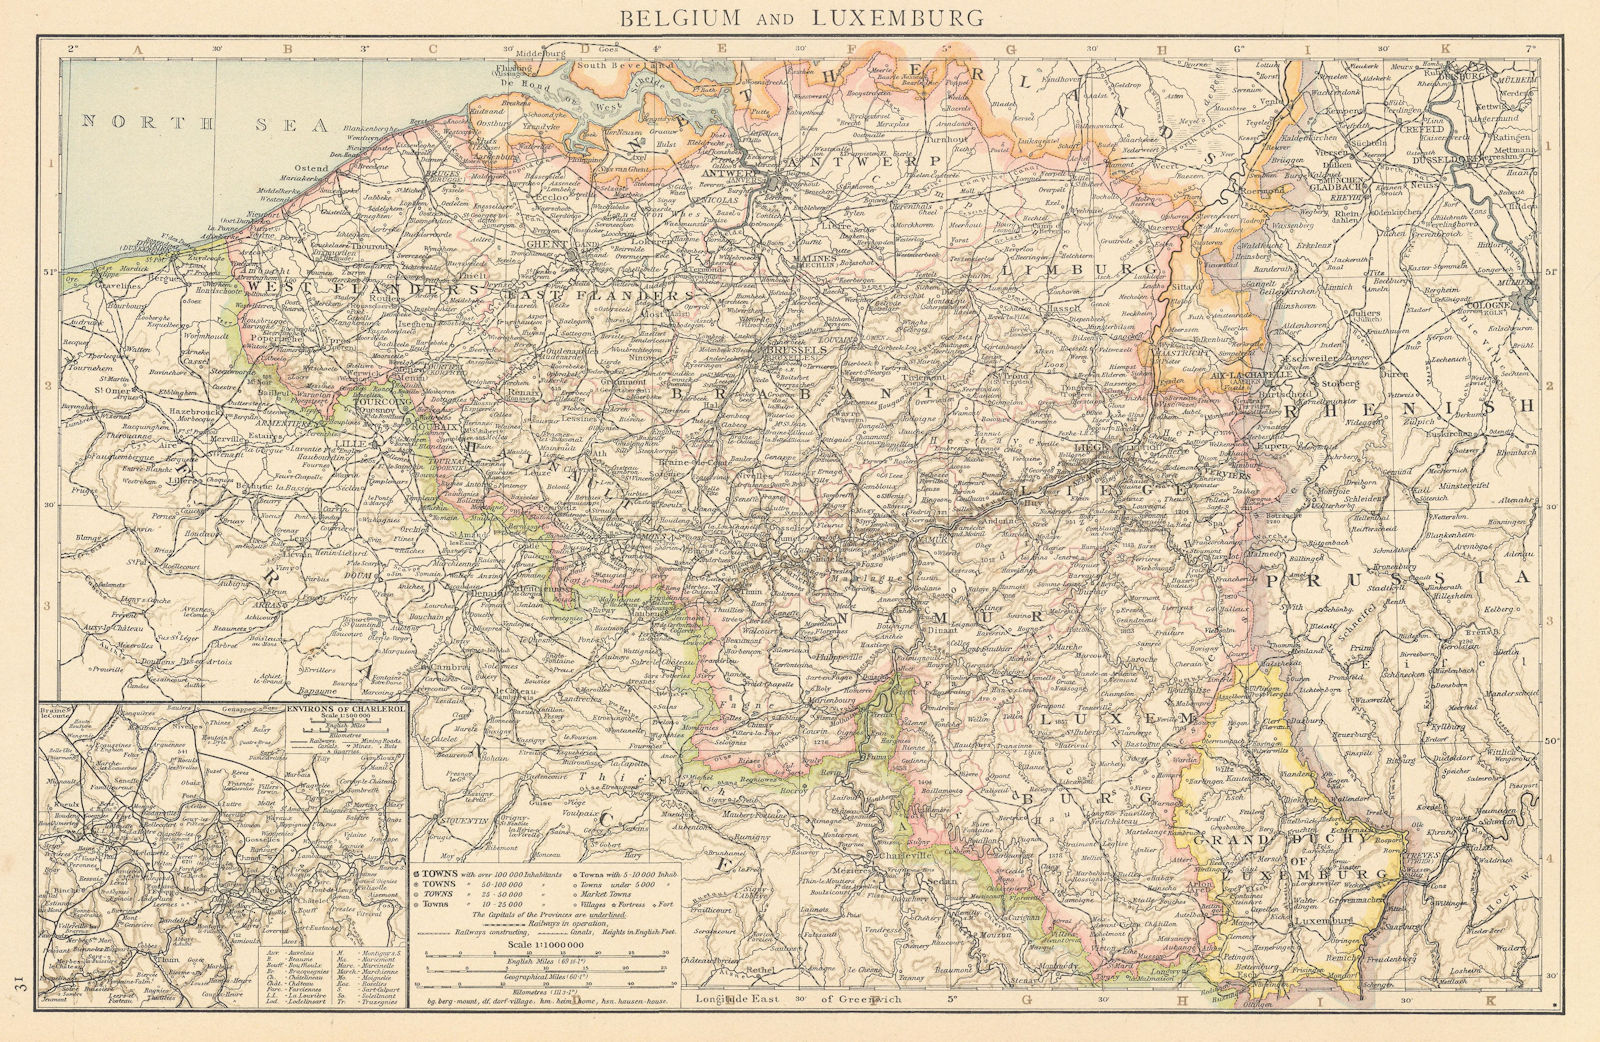 Belgium and Luxemburg. Environs of Charleroi. THE TIMES 1895 old antique map